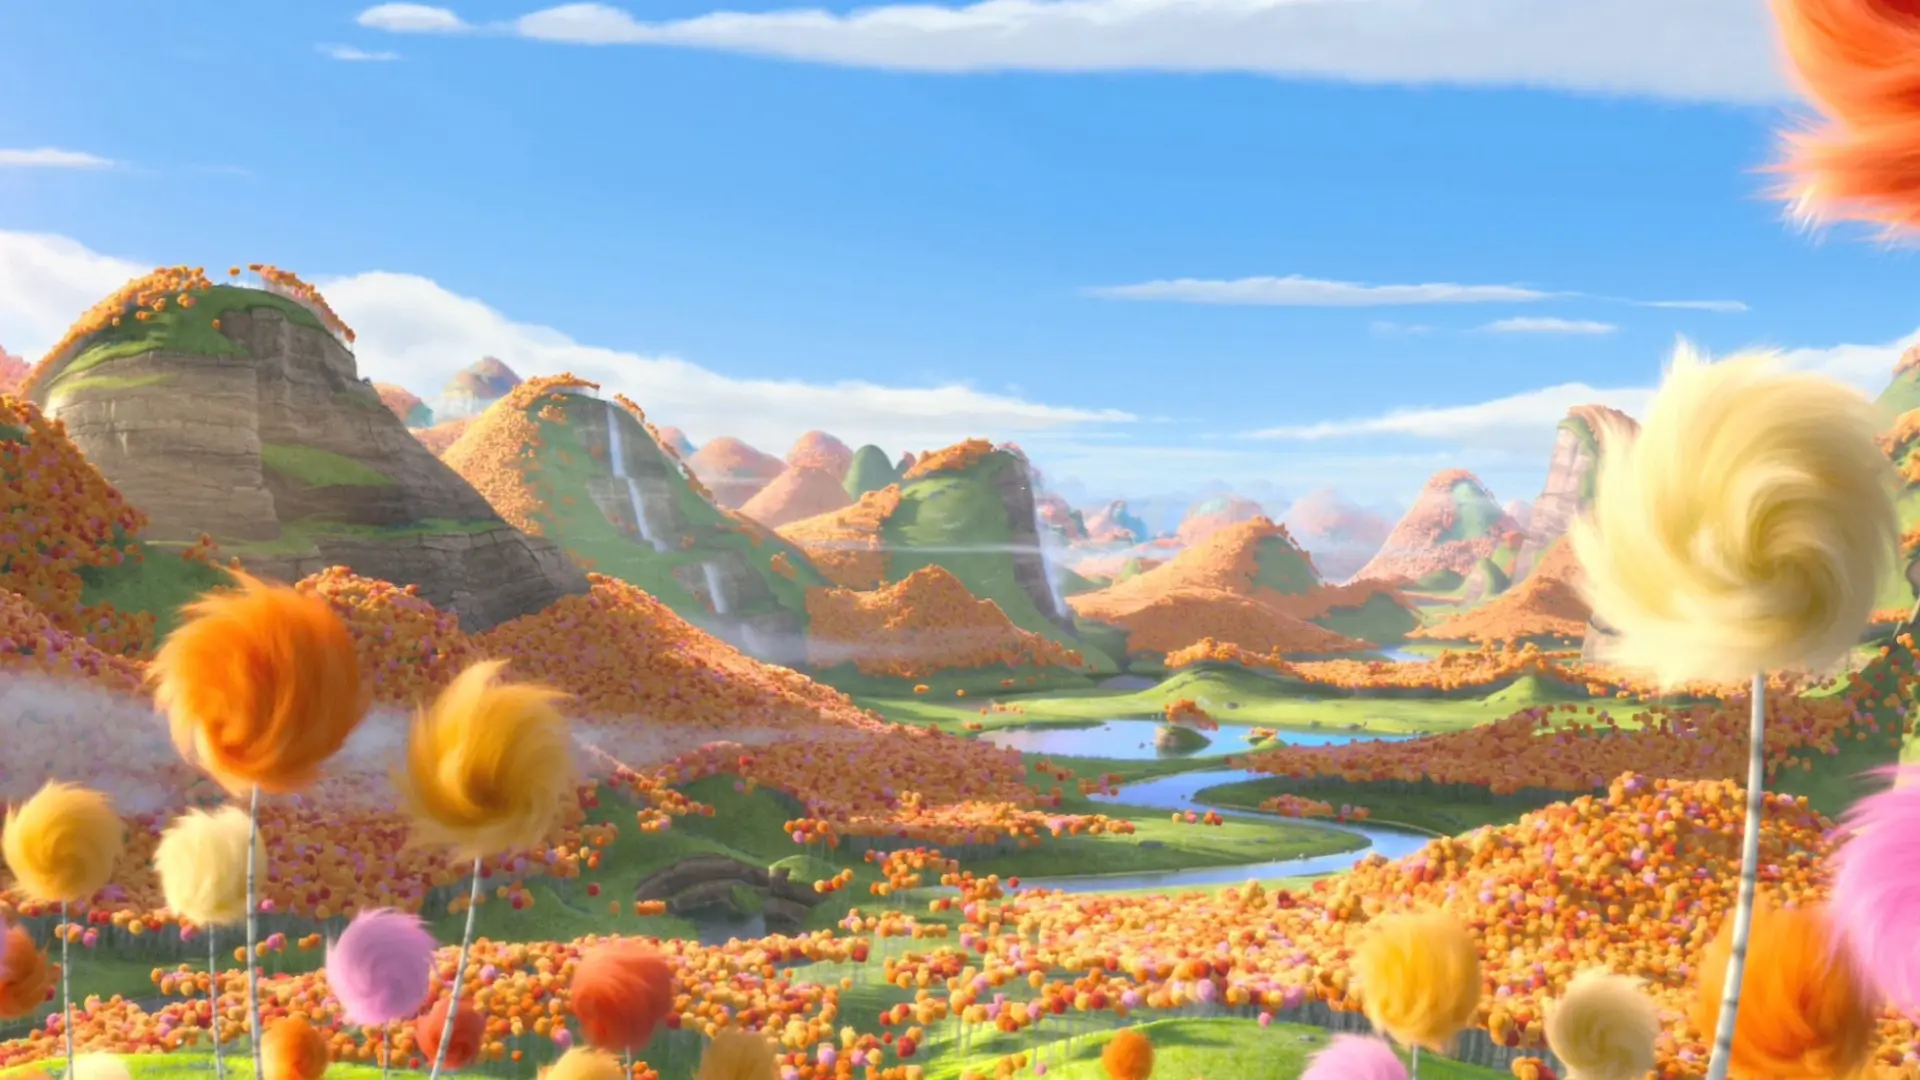 Movie The Lorax wallpaper 3 | Background Image